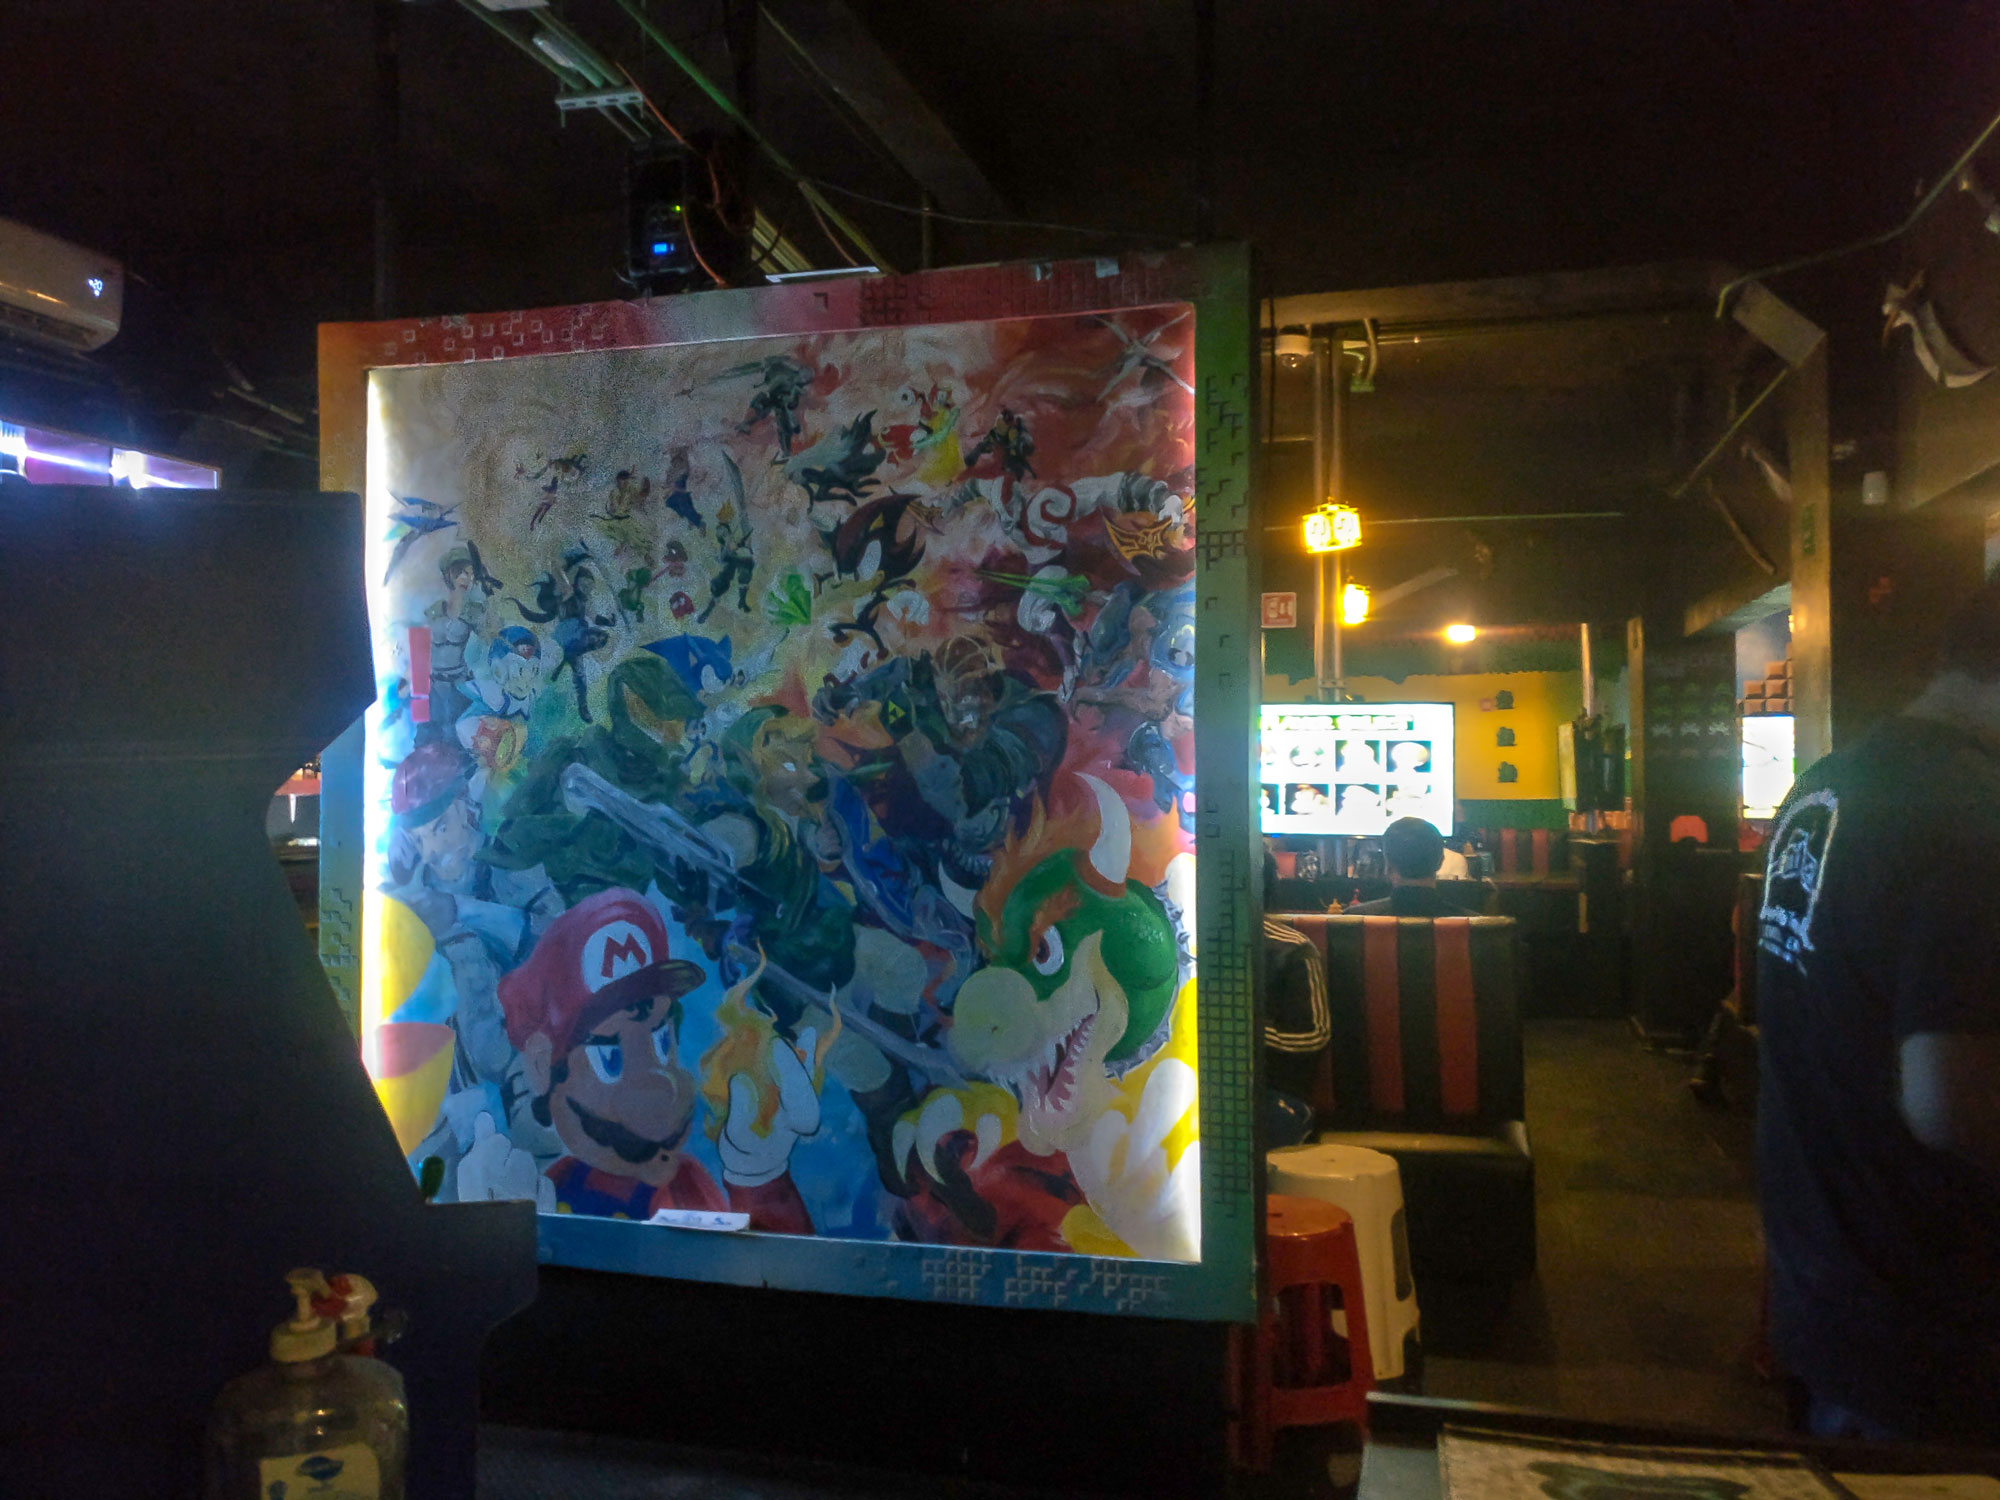 Interior of Level Up Game Bar with a mural of video game characters